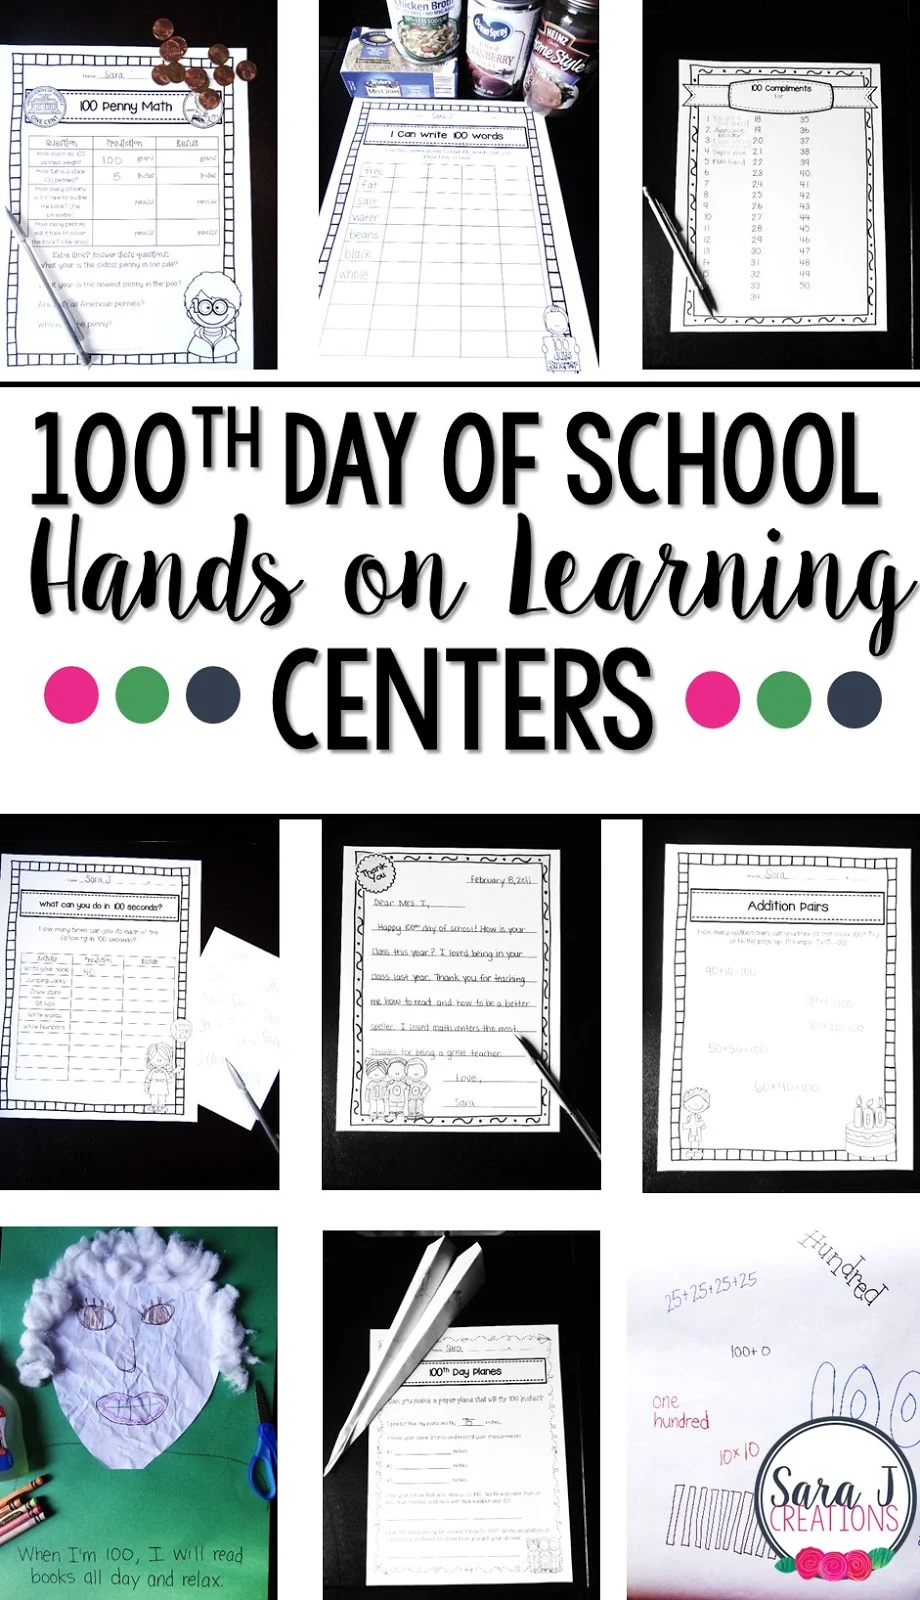 100th day of school activities, ideas and freebies!